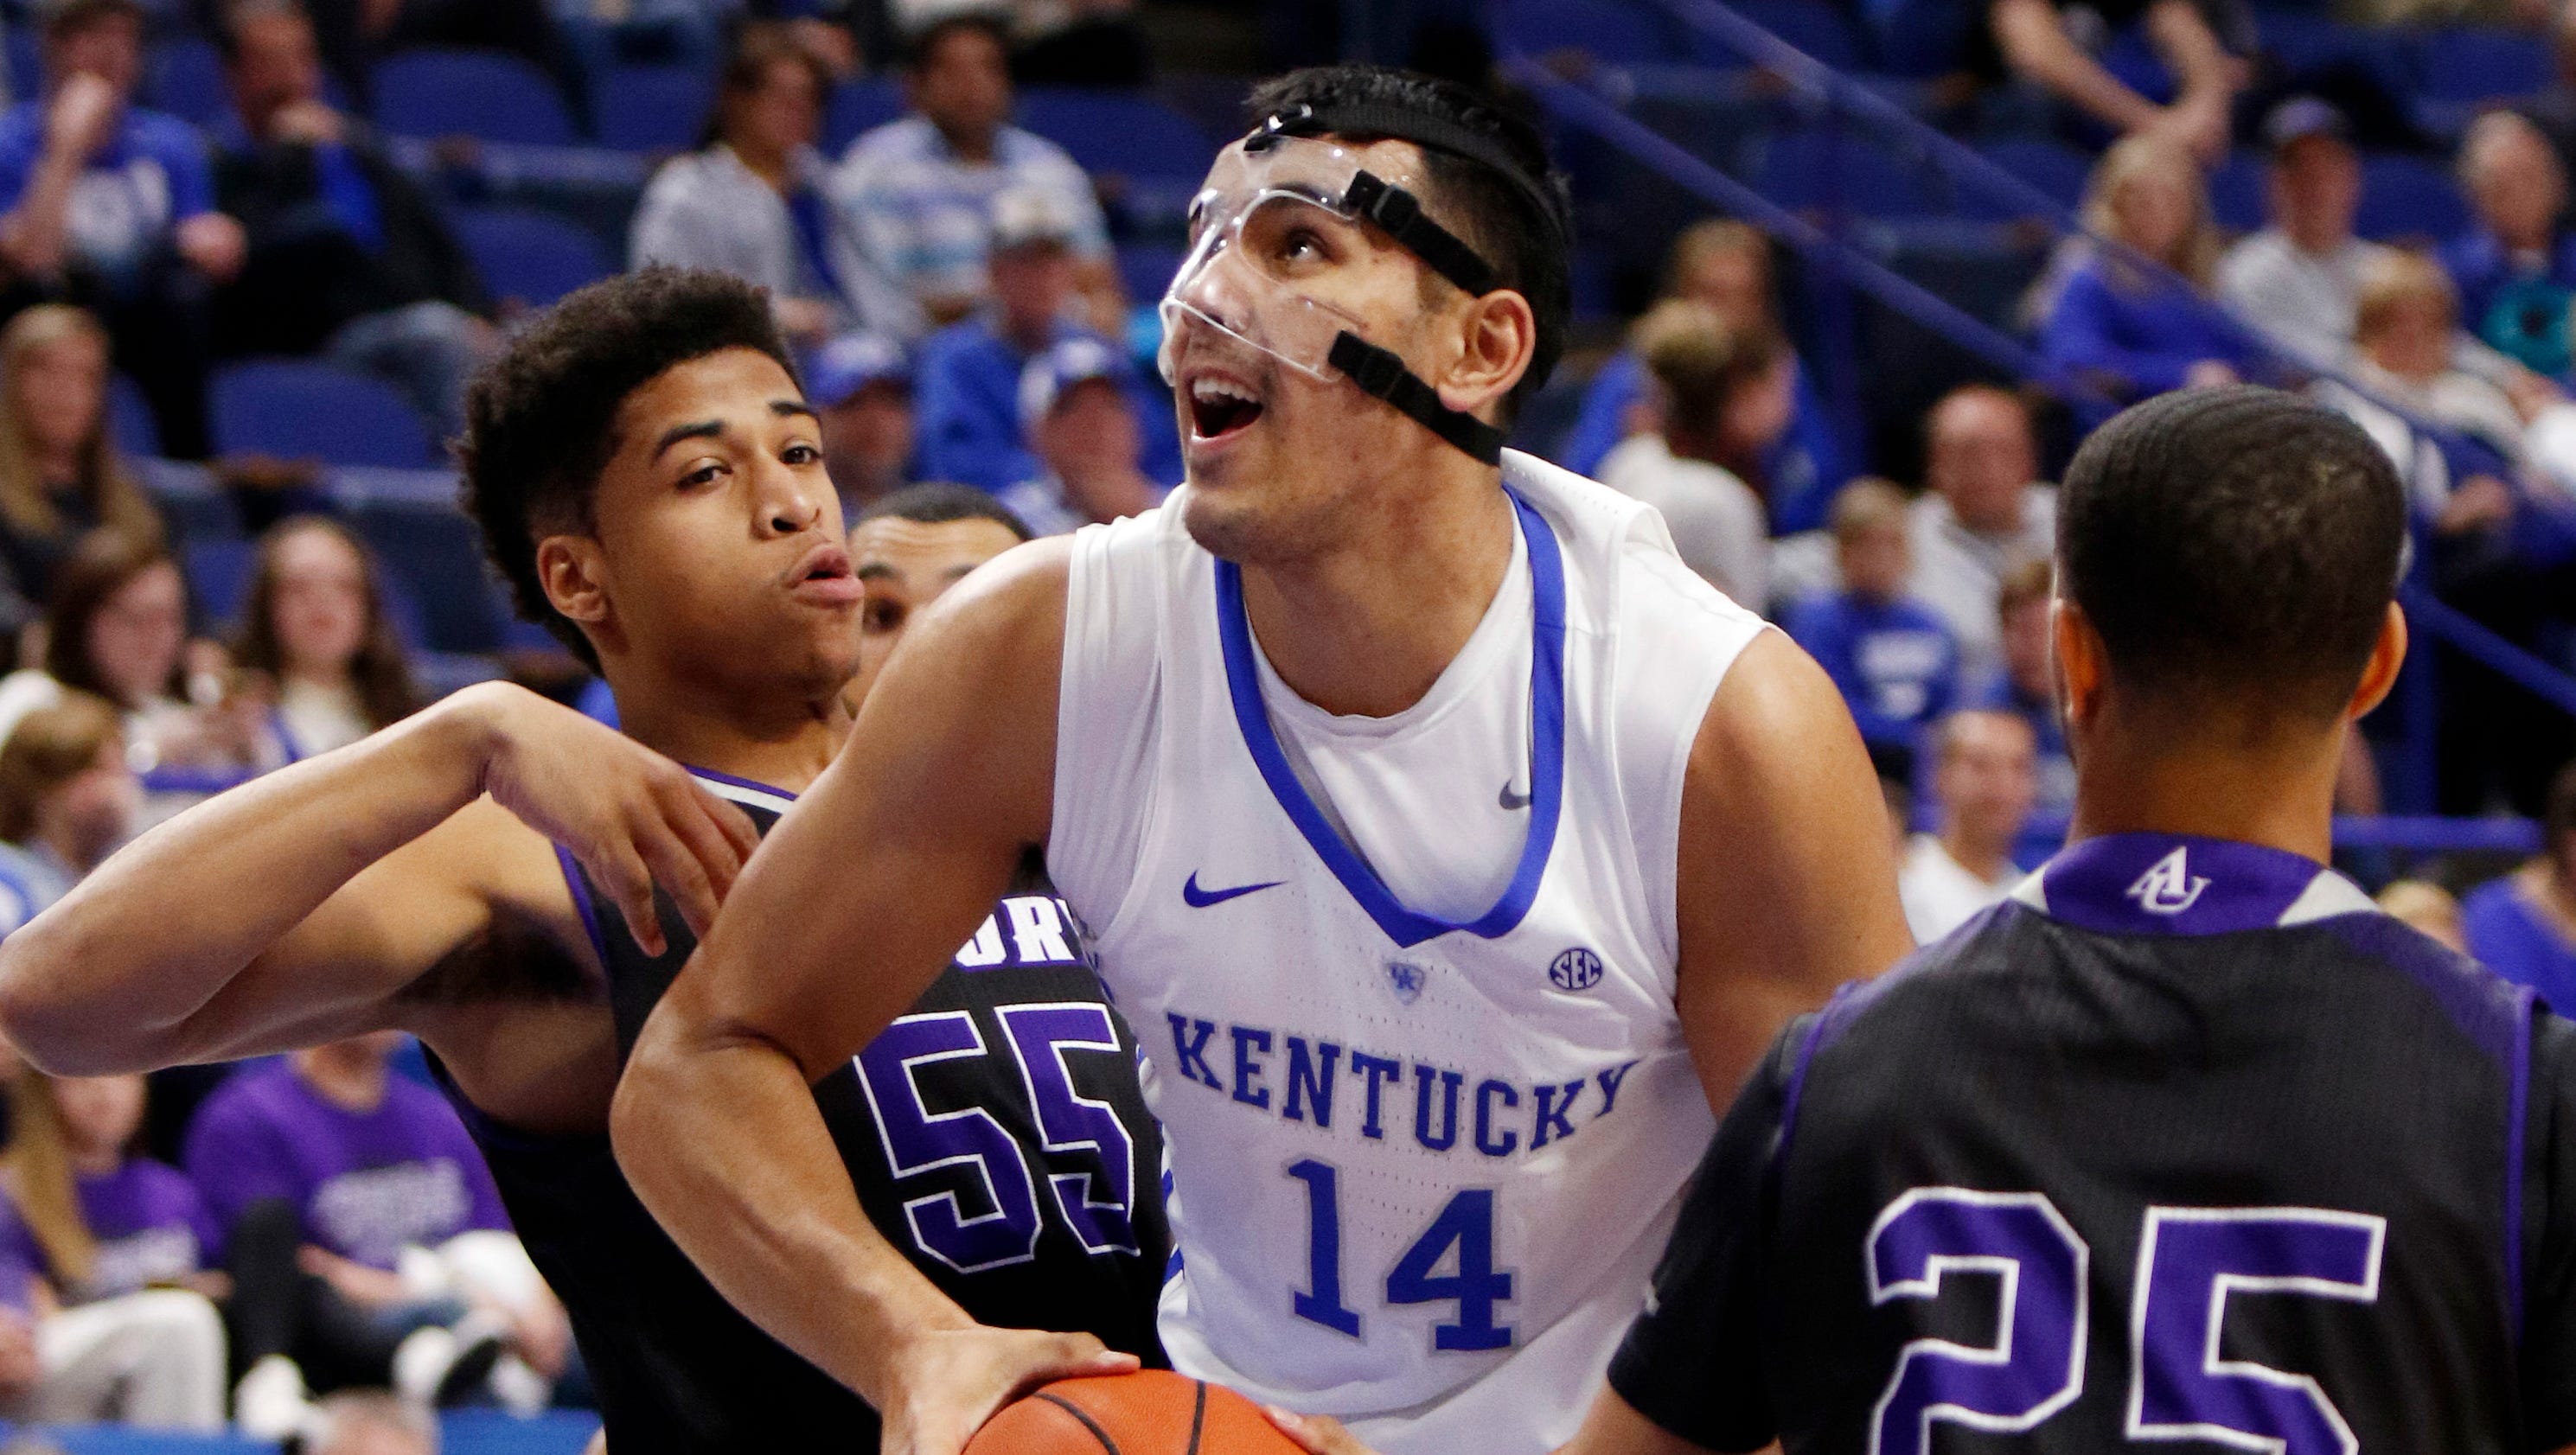 UK Basketball | Kentucky's Tai Wynyard to play for New Zealand this summer - The Courier-Journal